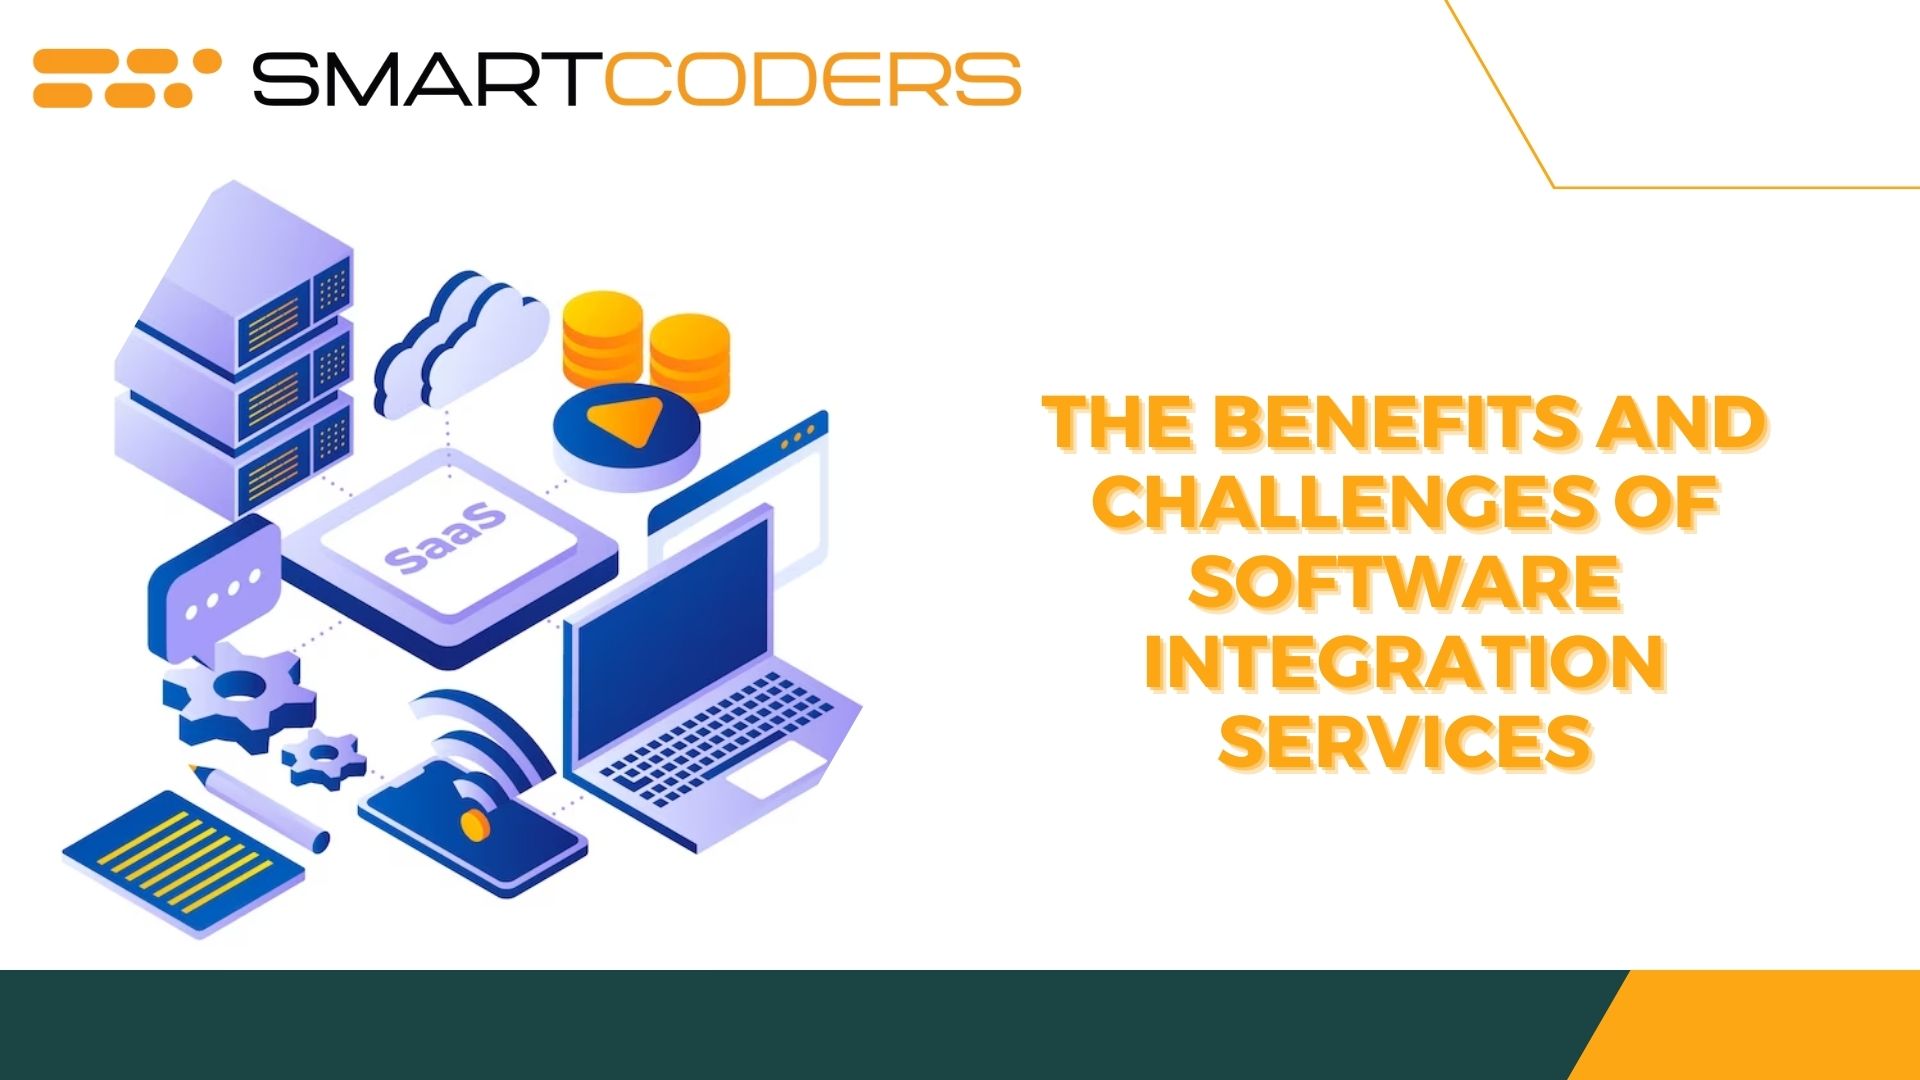 The Benefits and Challenges of Software Integration Services